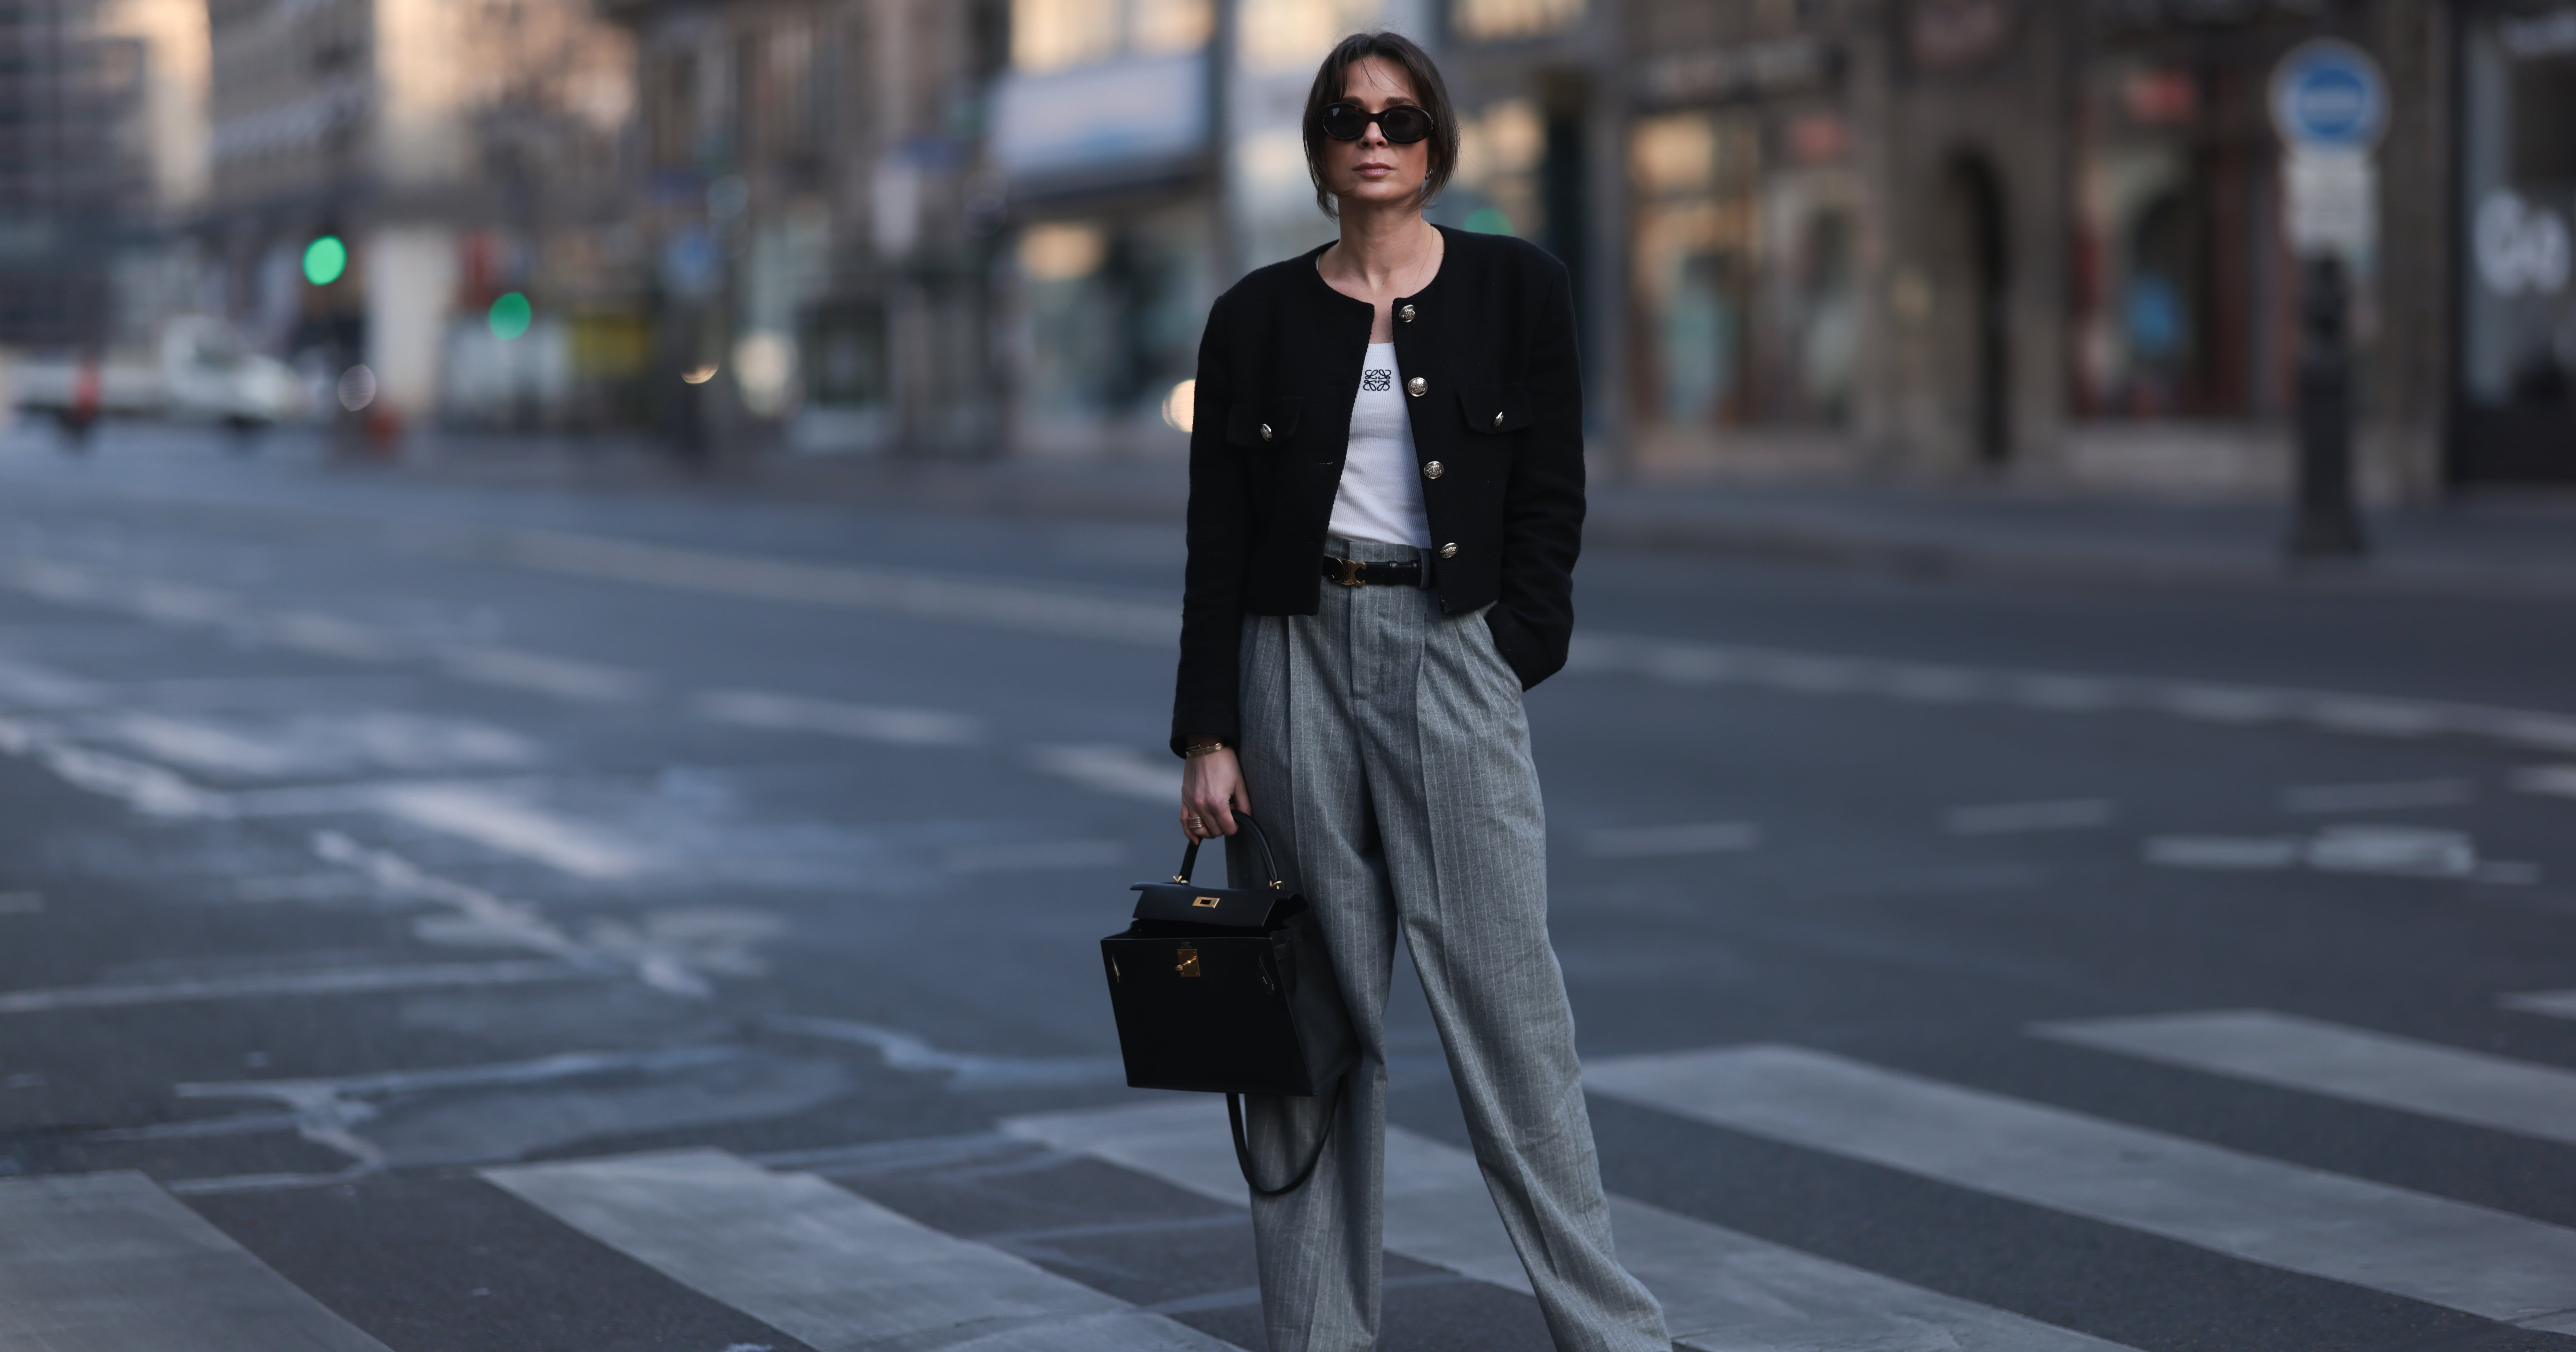 21 Must-Have Staples For A Professional Outfit